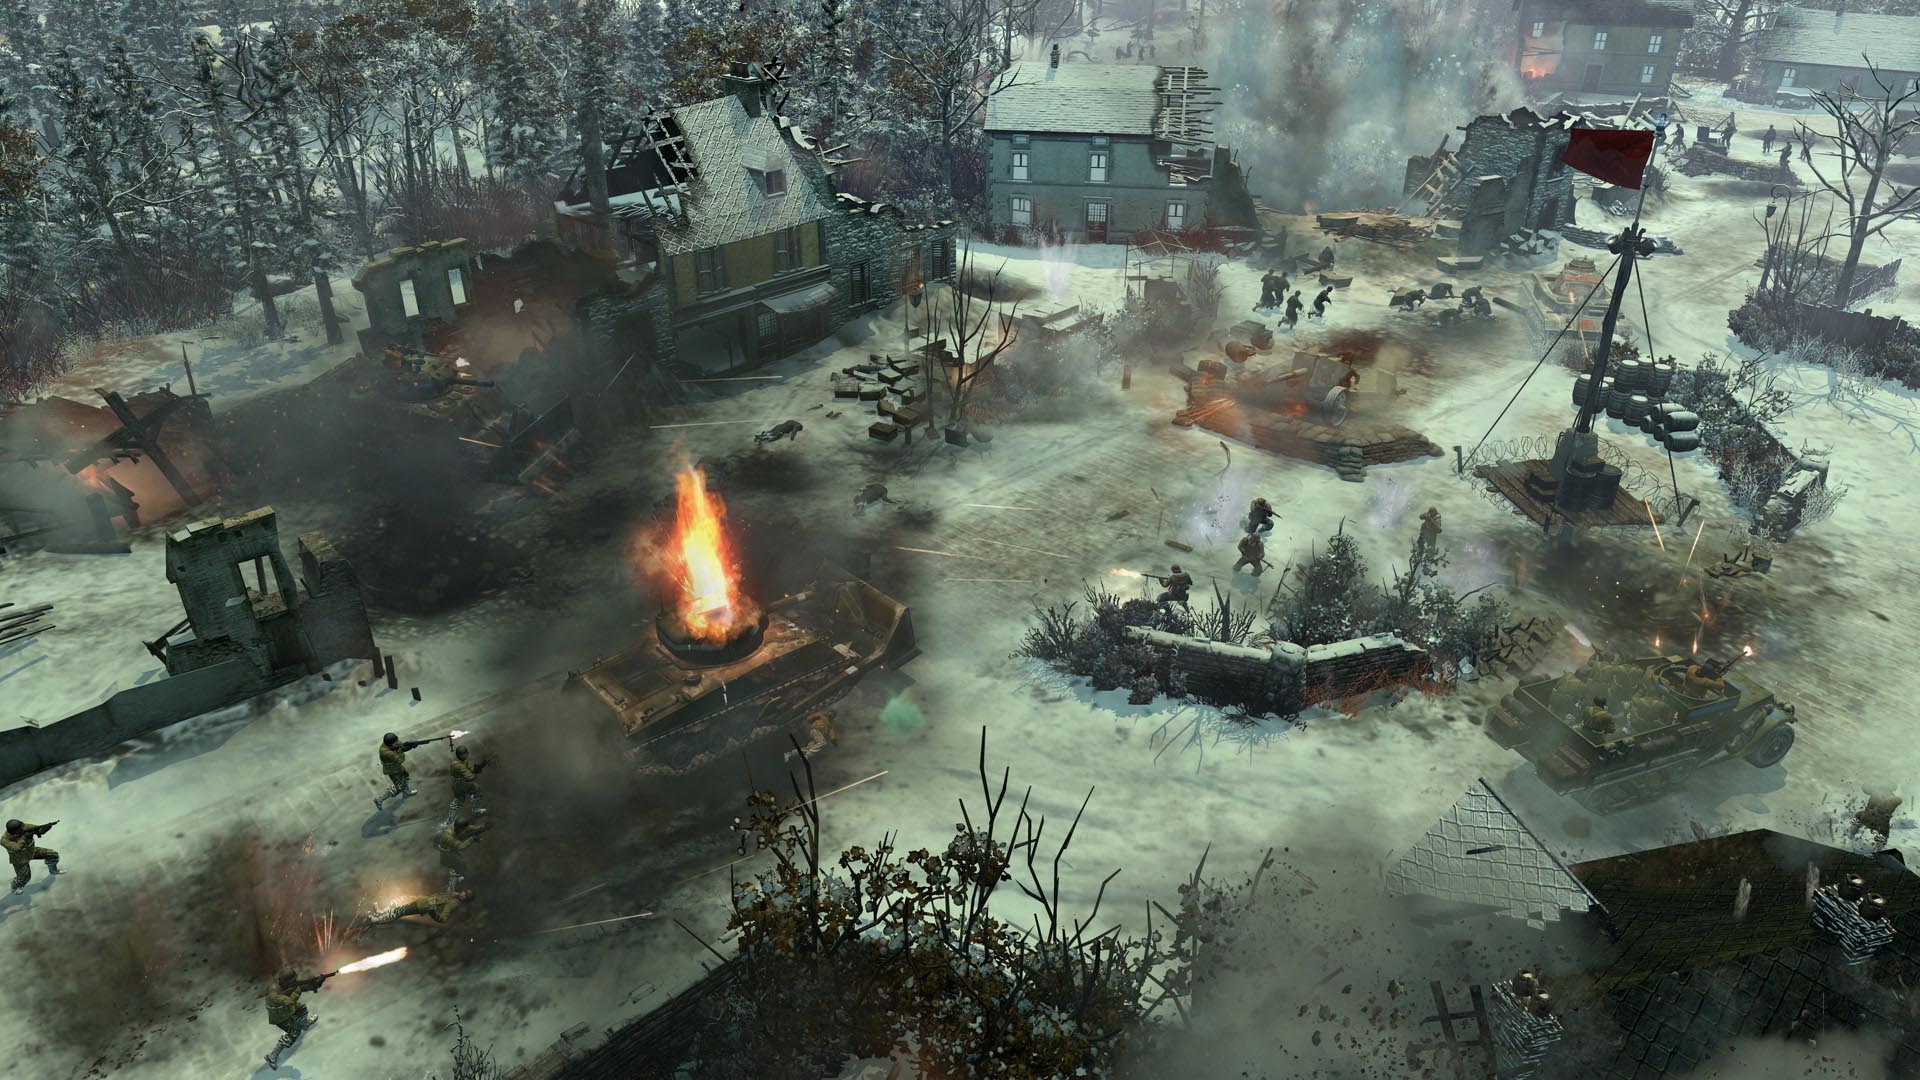 company of heroes 2 how to make maps